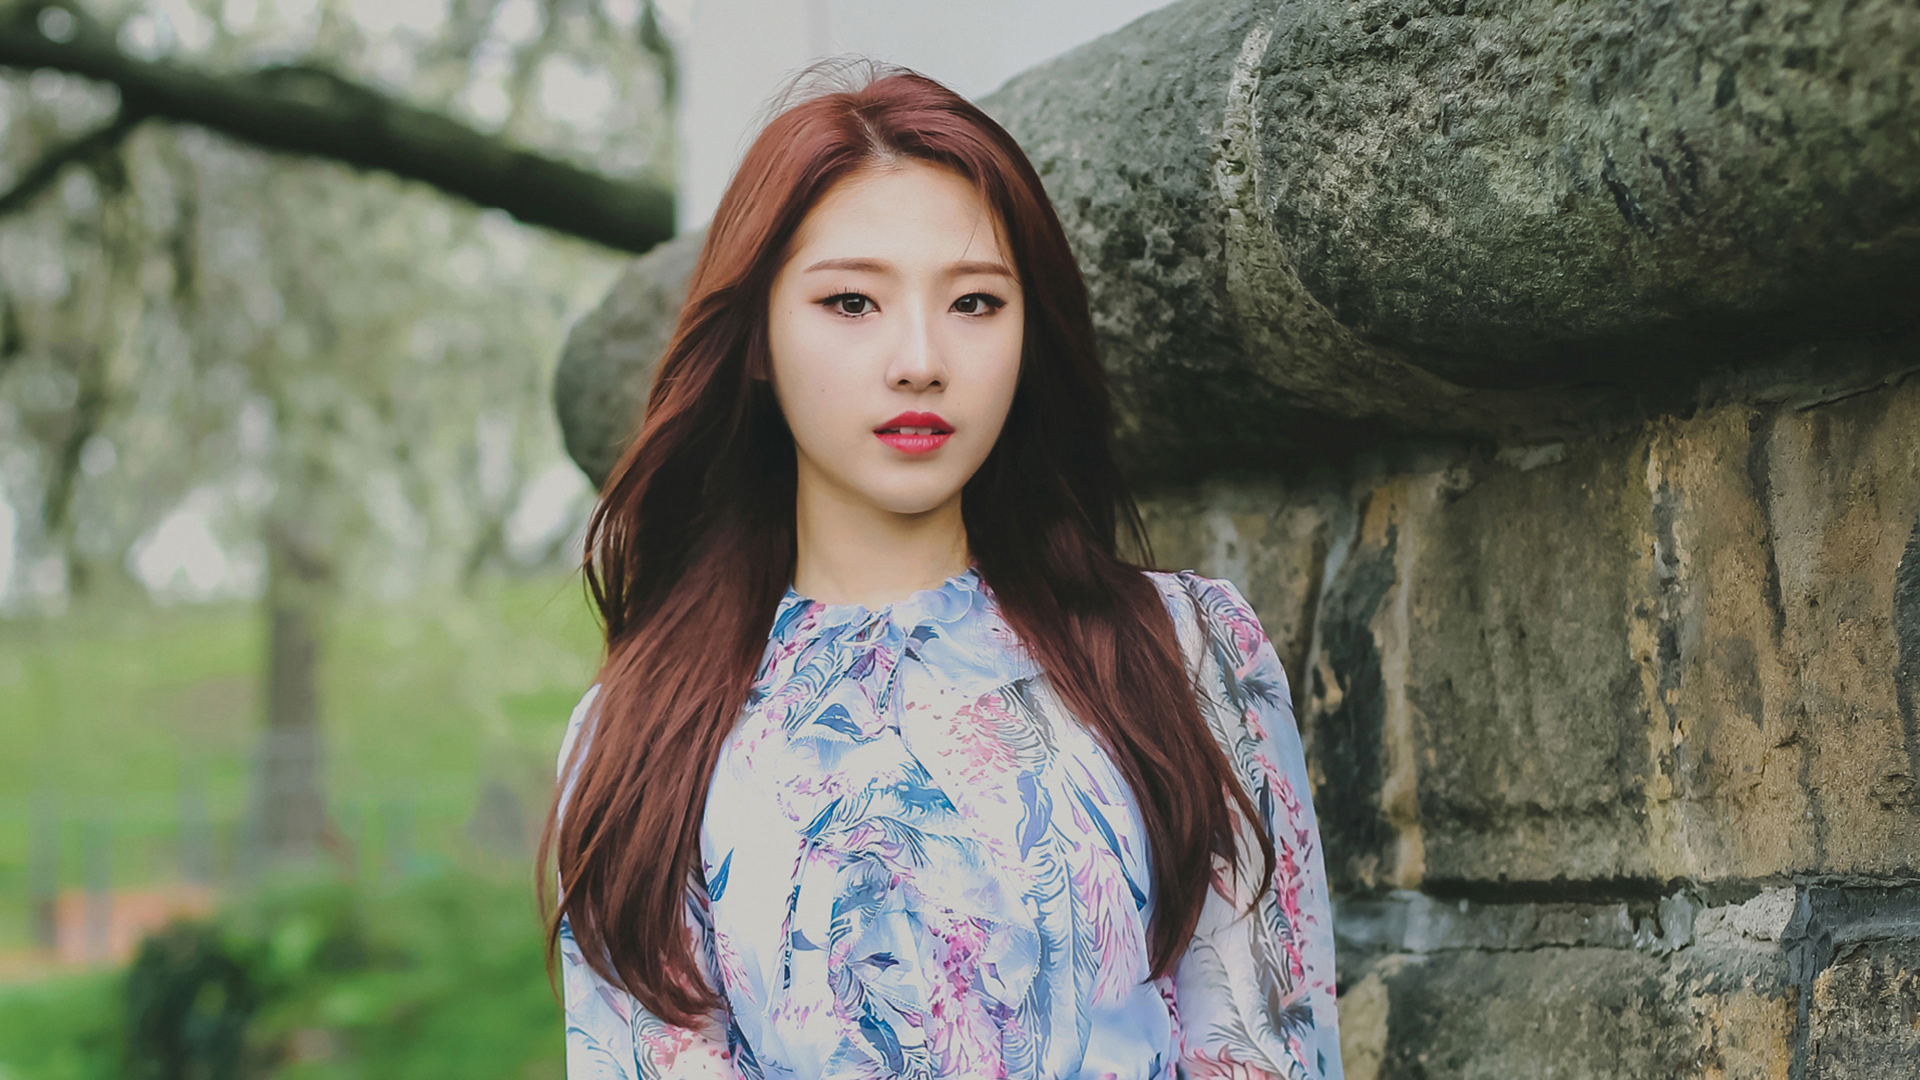 Music Loona HD Wallpaper | Background Image